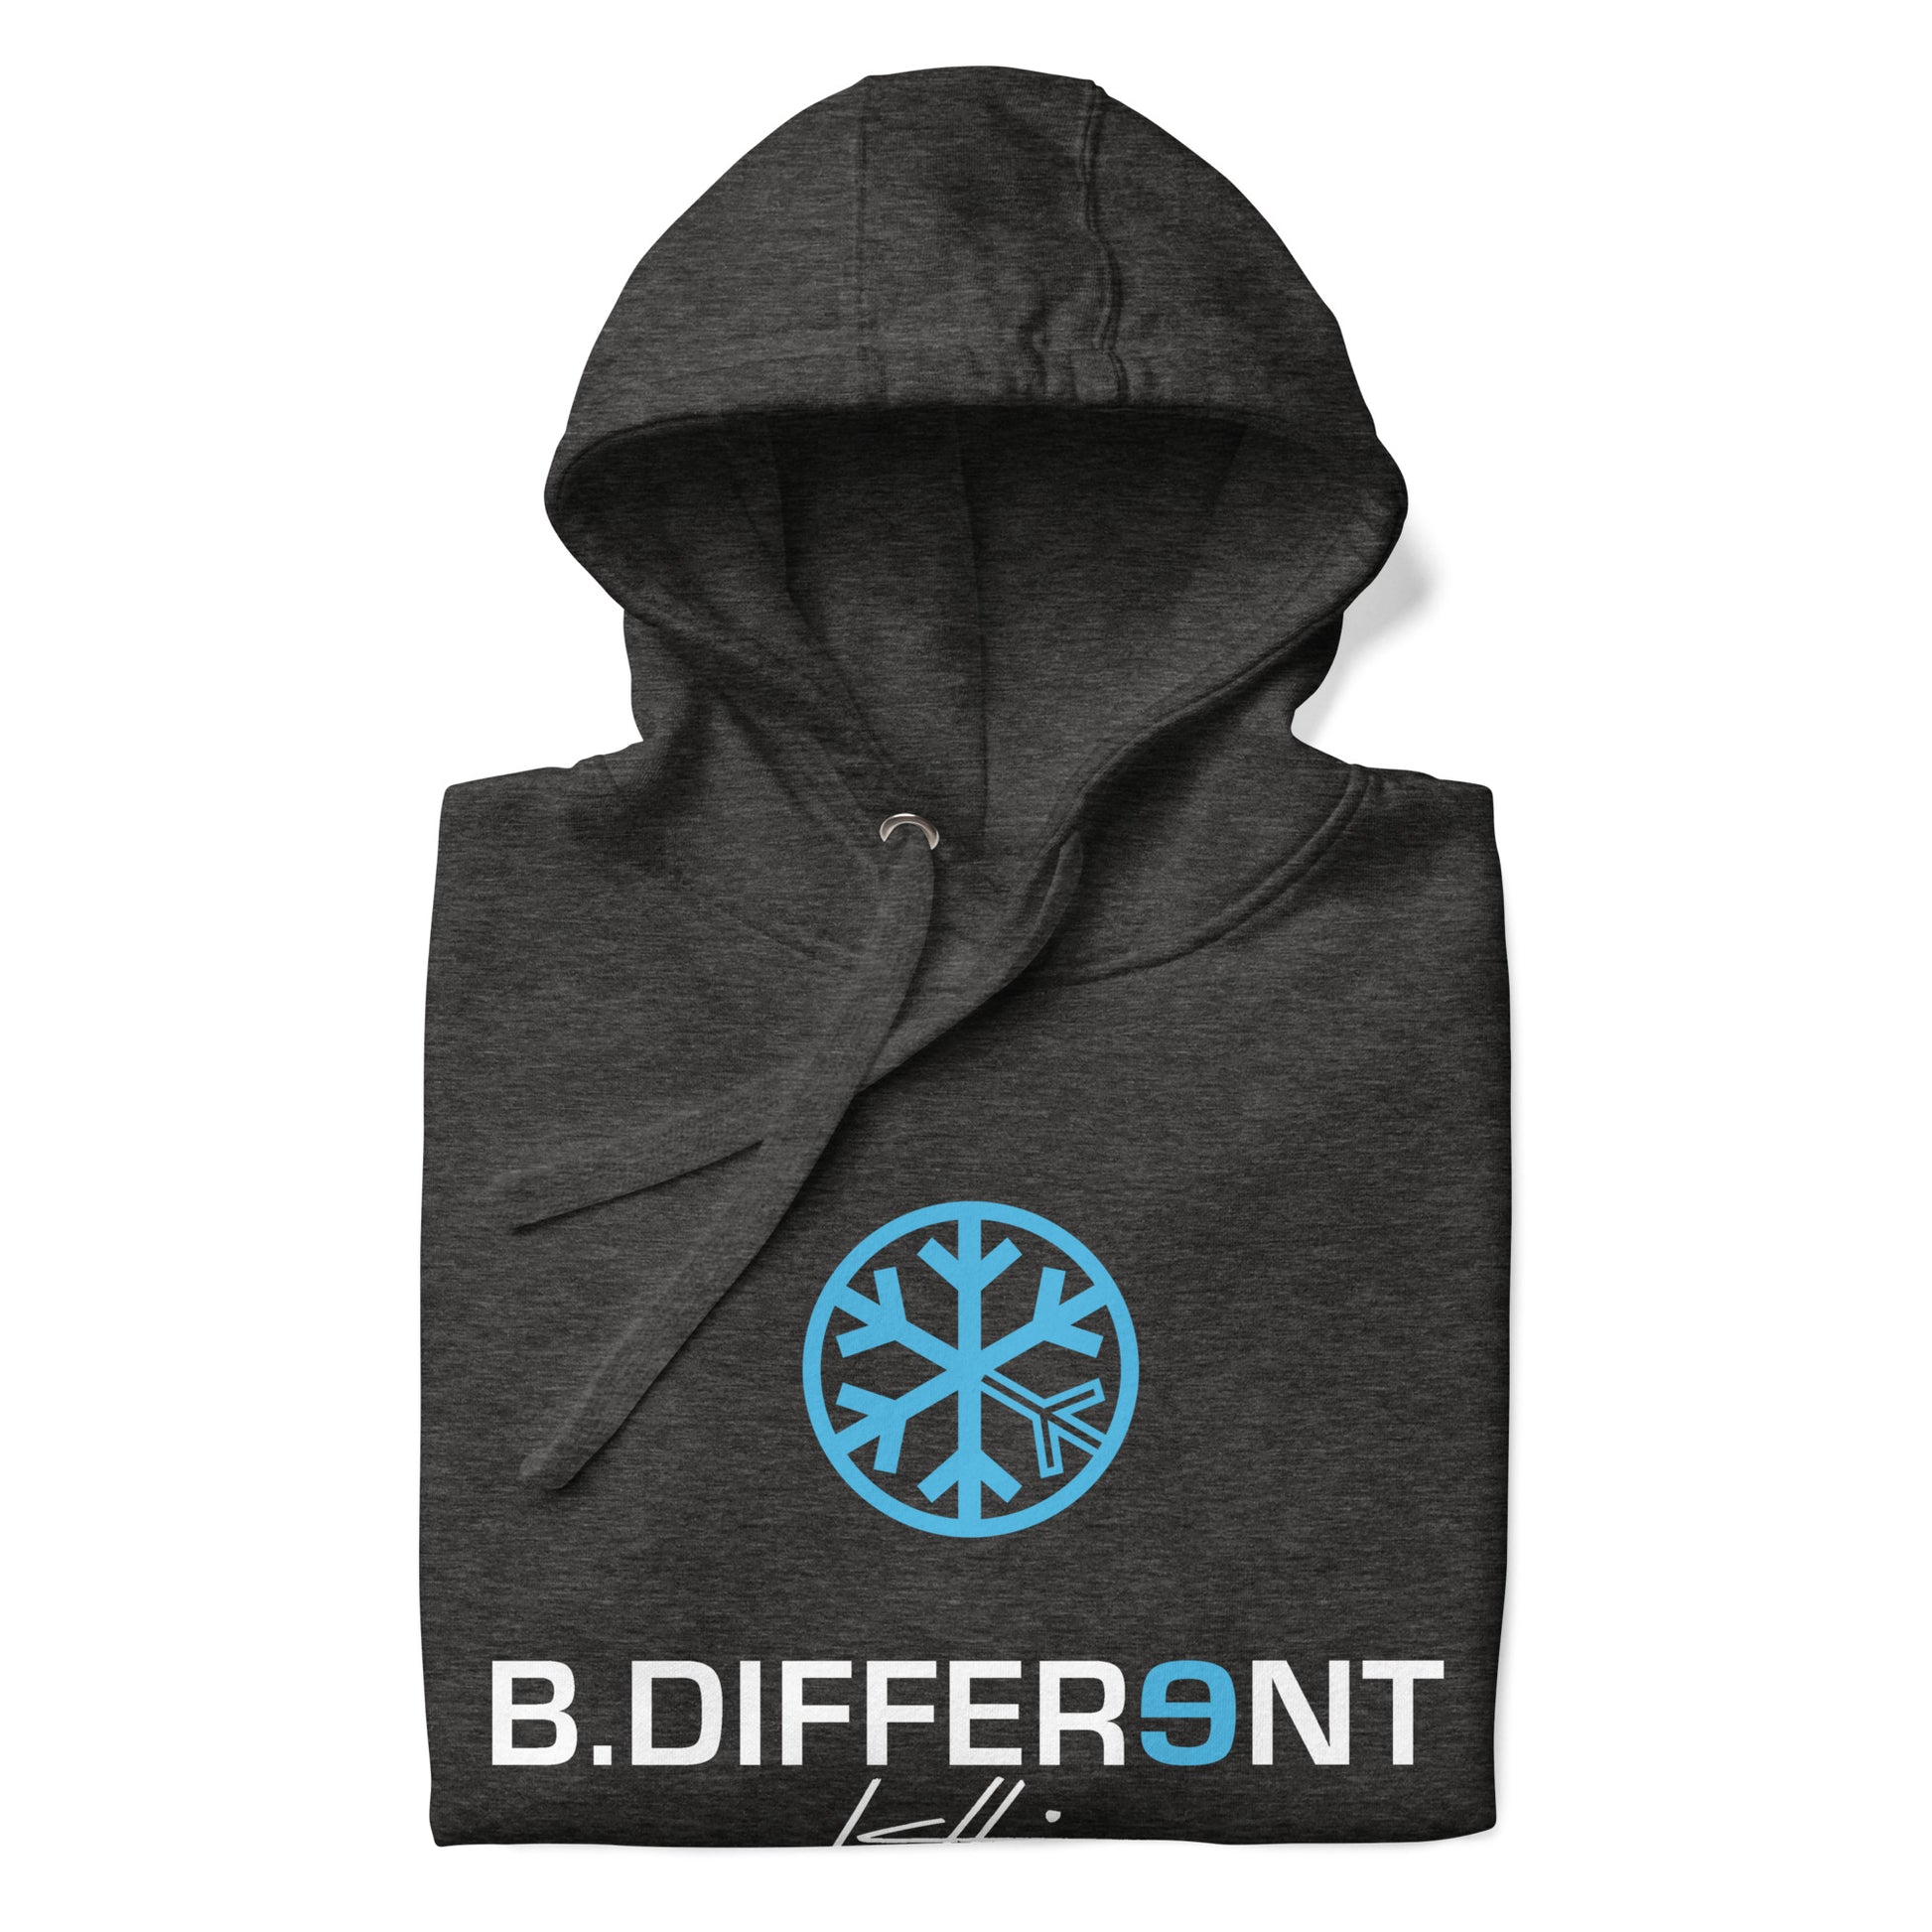 folded hoodie Logo dark gray by B.Different Clothing independent streetwear brand inspired by street art graffiti